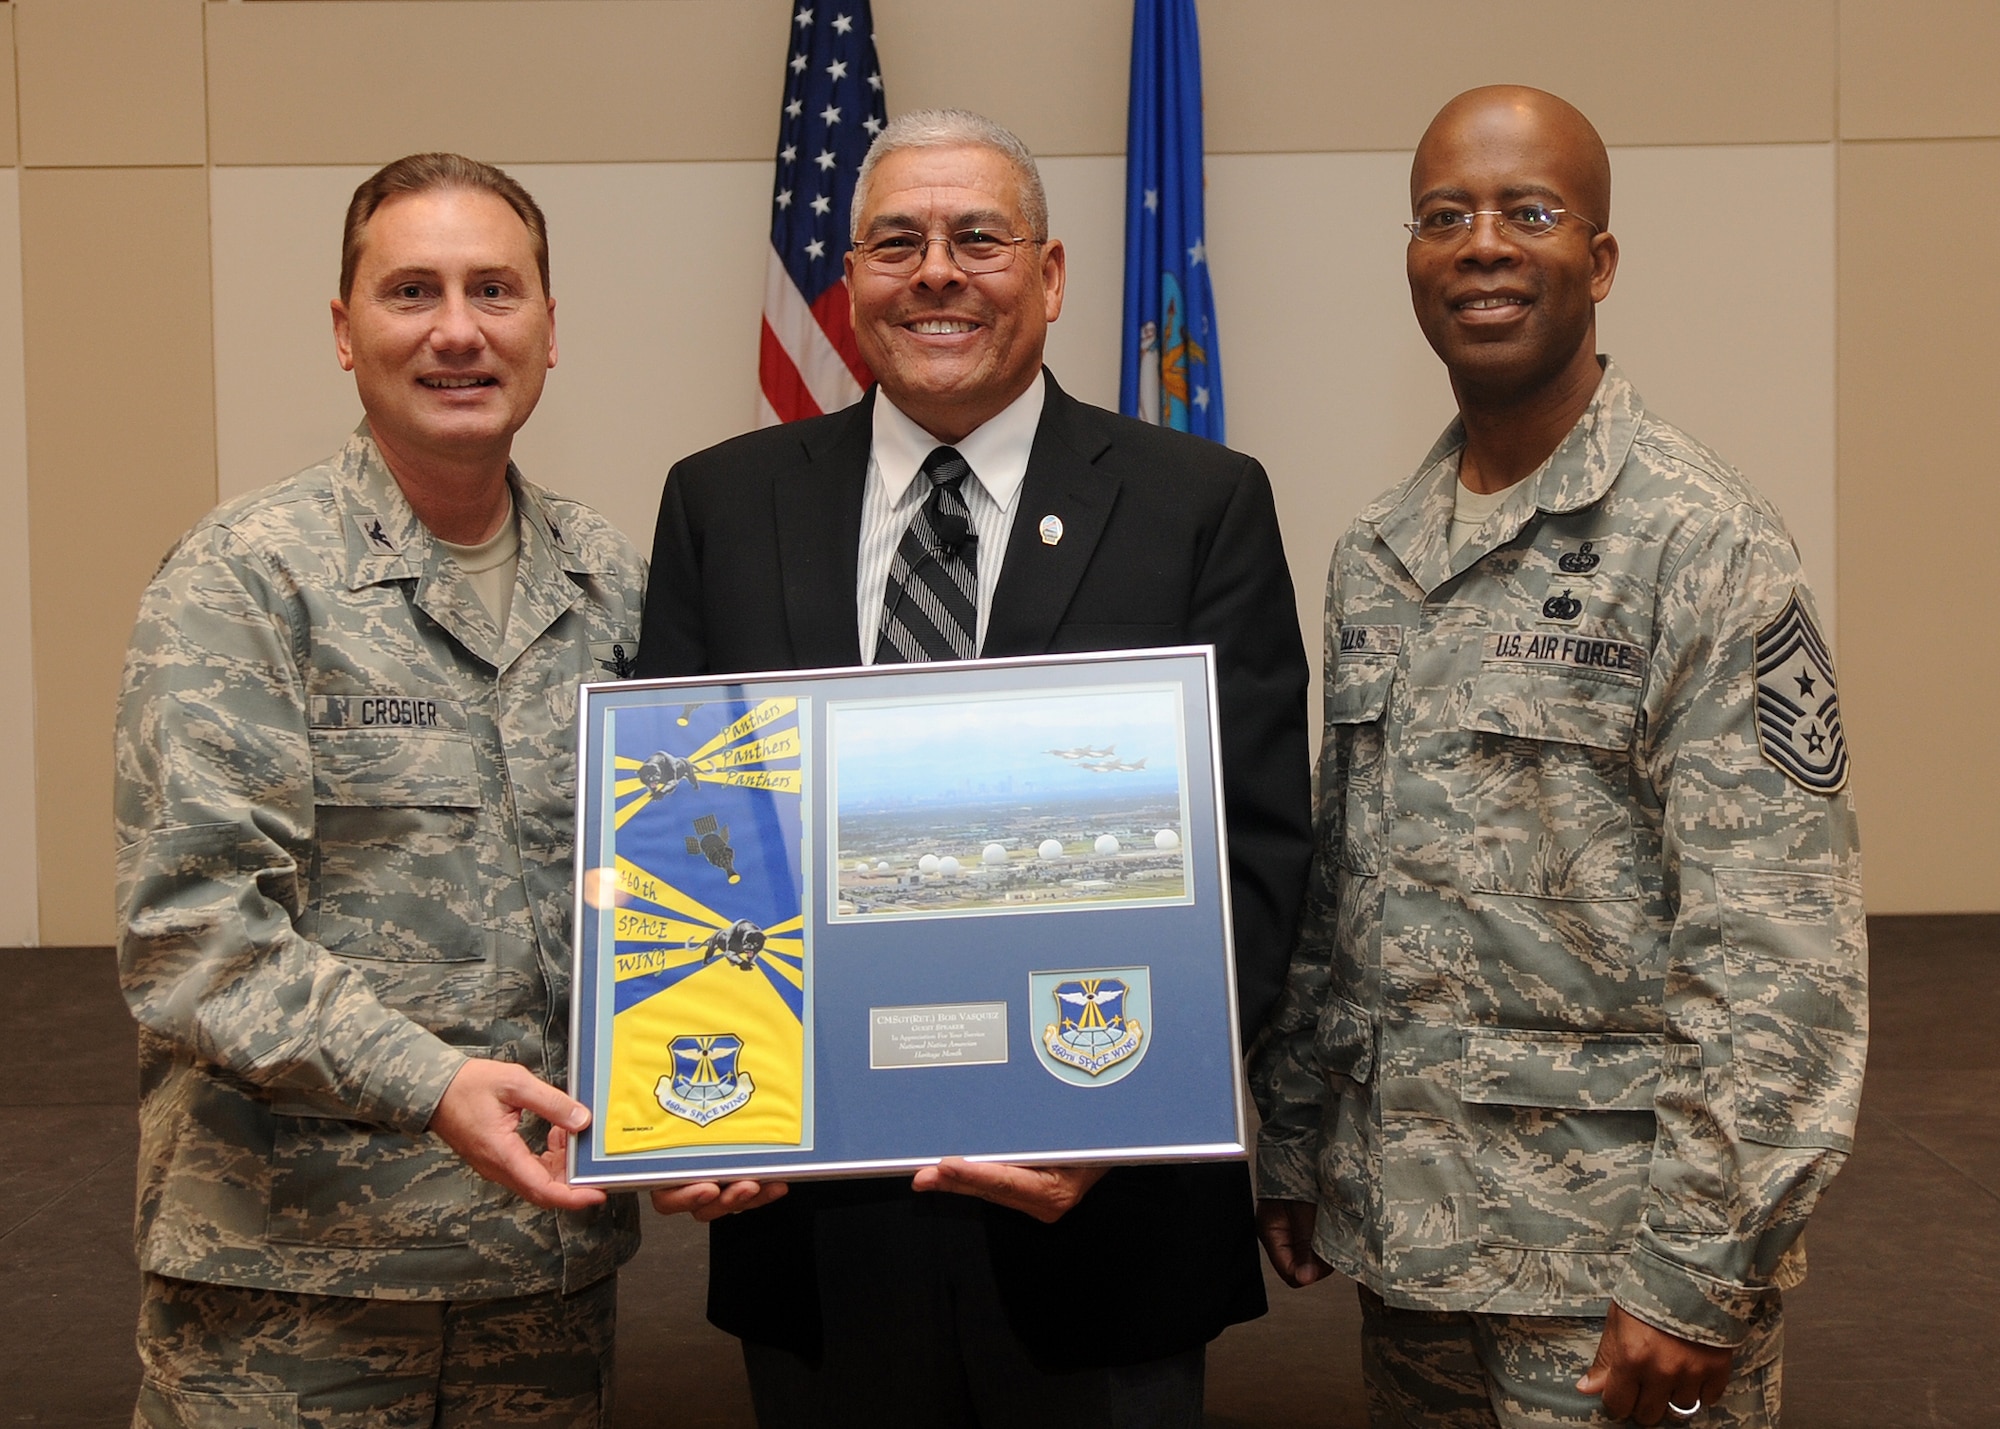 Buckley Air Force Base, Colo.-  Colonel Clinton Crosier and Chief Master Sgt. Robert Ellis present Chief Master Sgt (Ret.) Bob Vasquez with an honorary plaque. CMSgt Vasquez was guest speaker for Buckley's Native American Heritage celebration. ( U.S. Air Force Photo by Airman 1st Class Marcy Glass )
